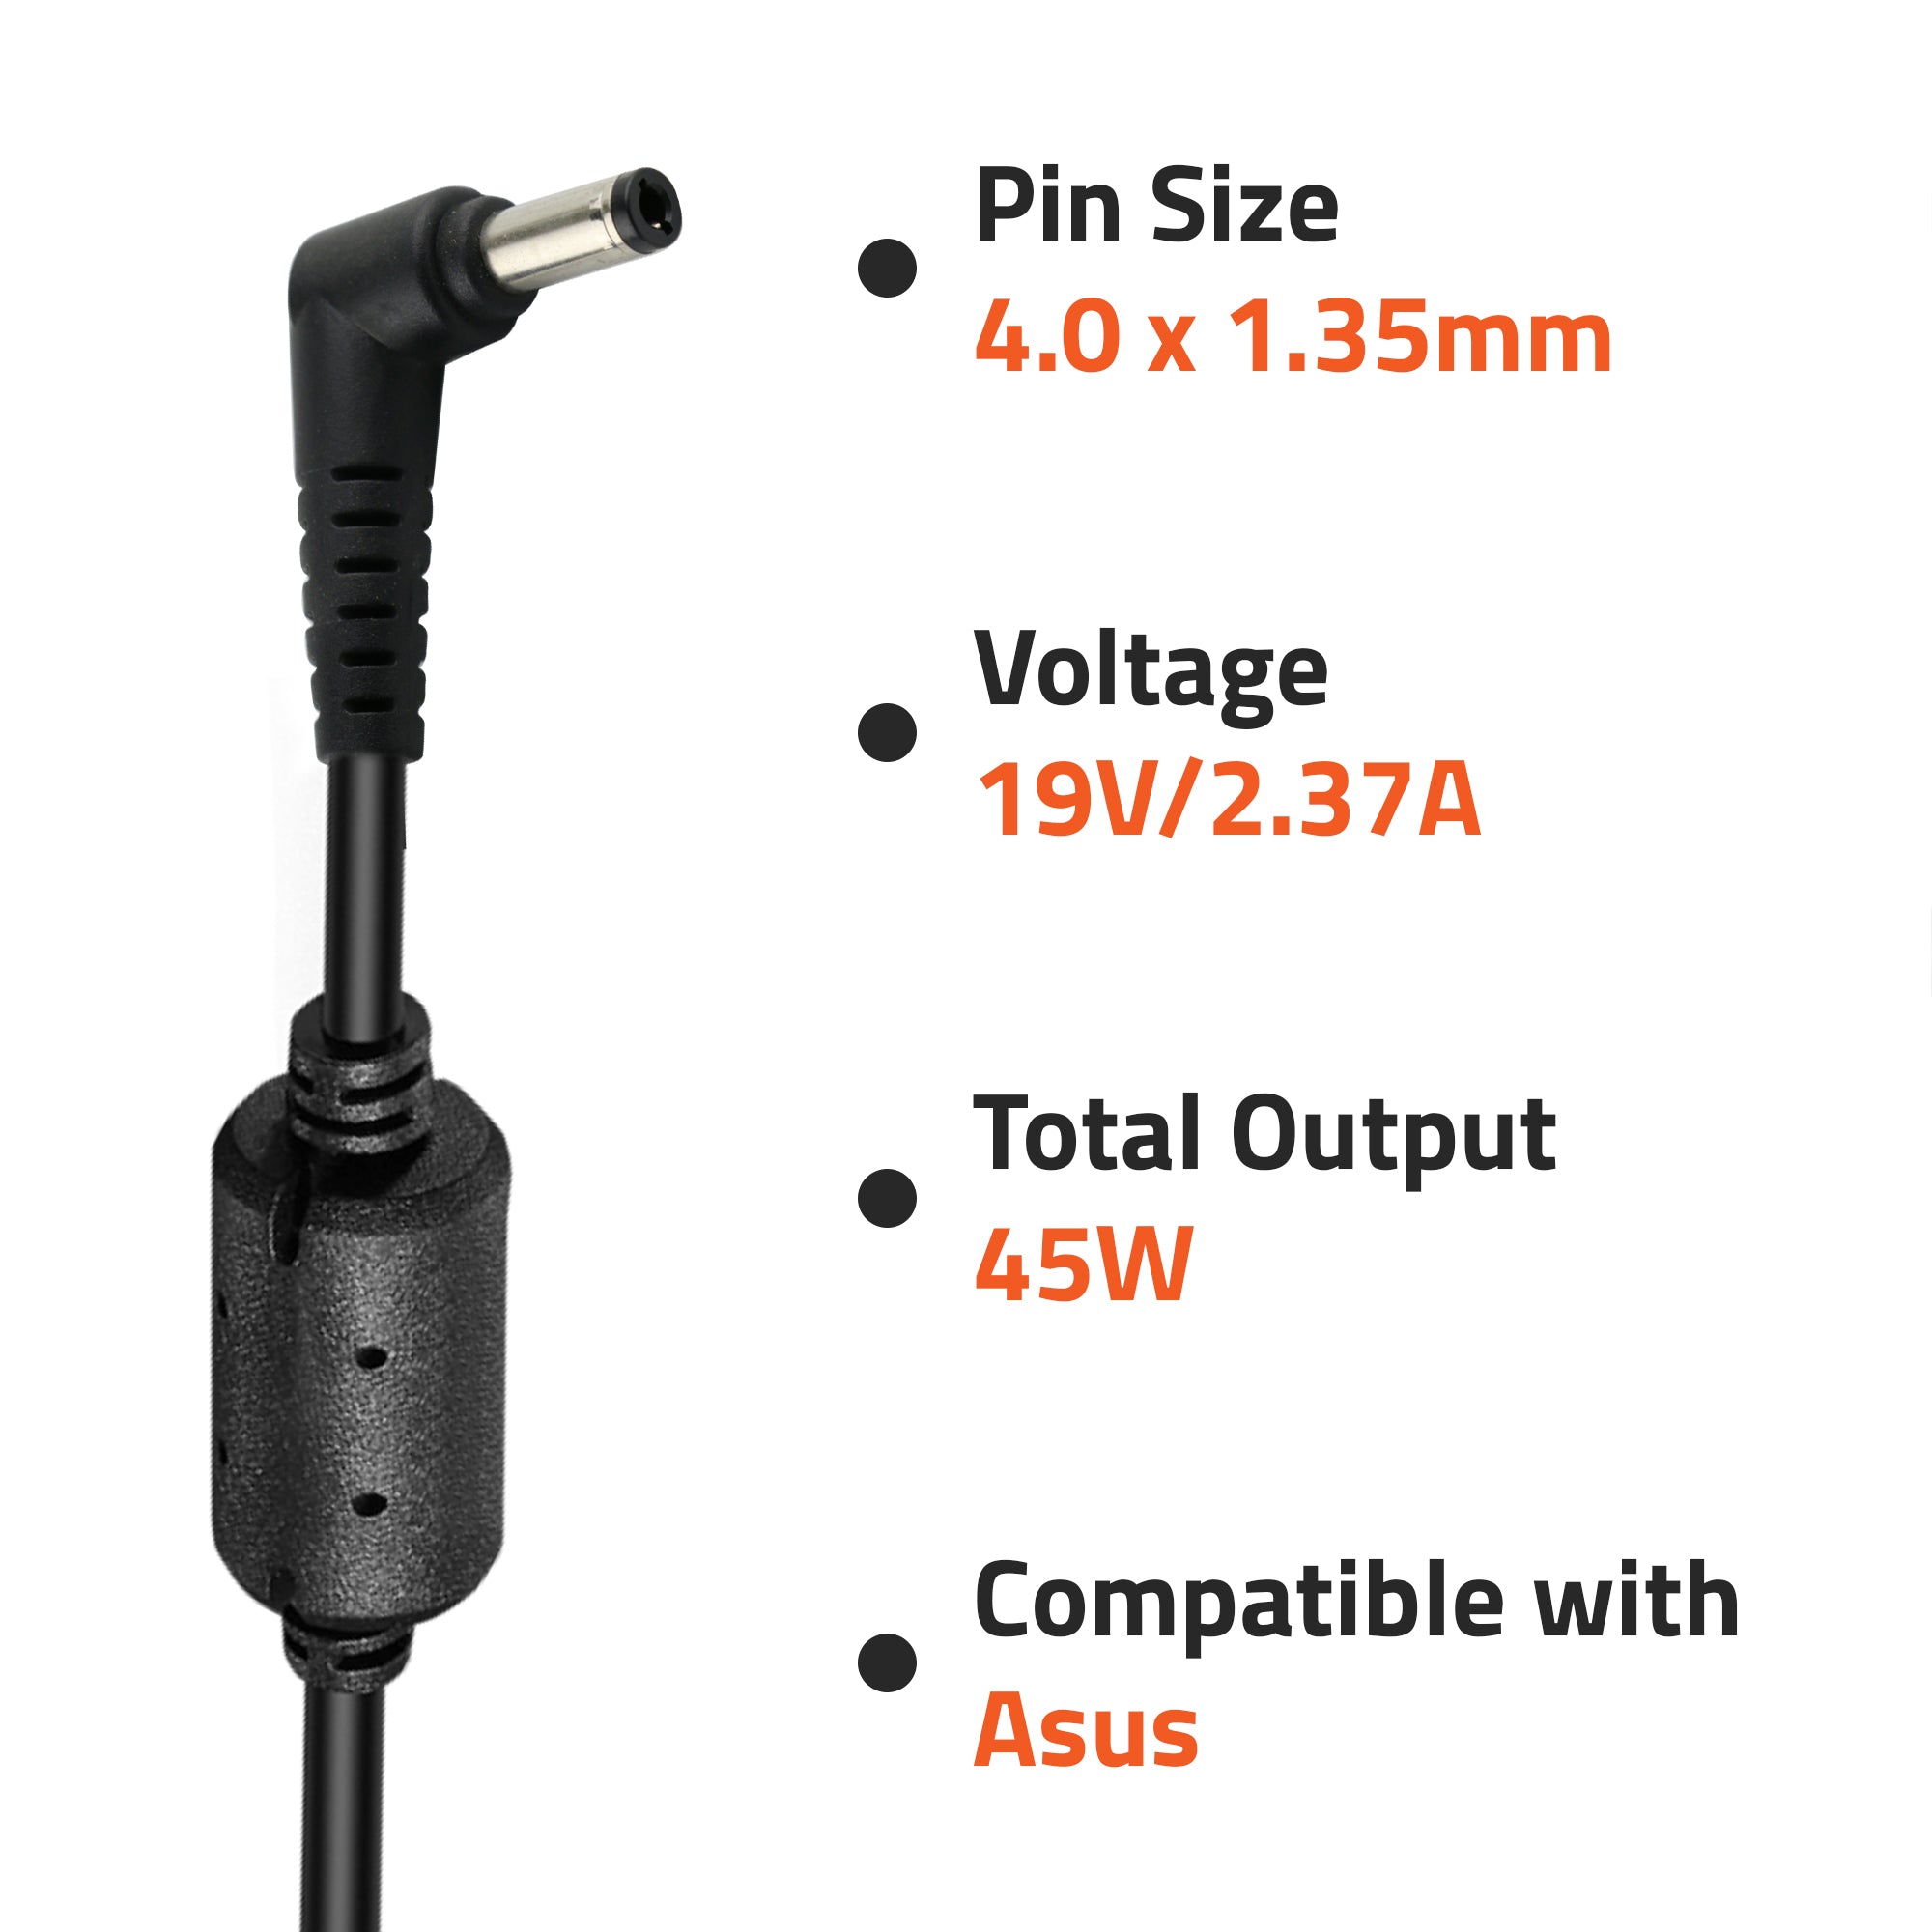 A0406 45Watt Laptop Adapter Compatible with Asus Laptops (19V/2.37A ,Pin : 4.0 x 1.35mm)